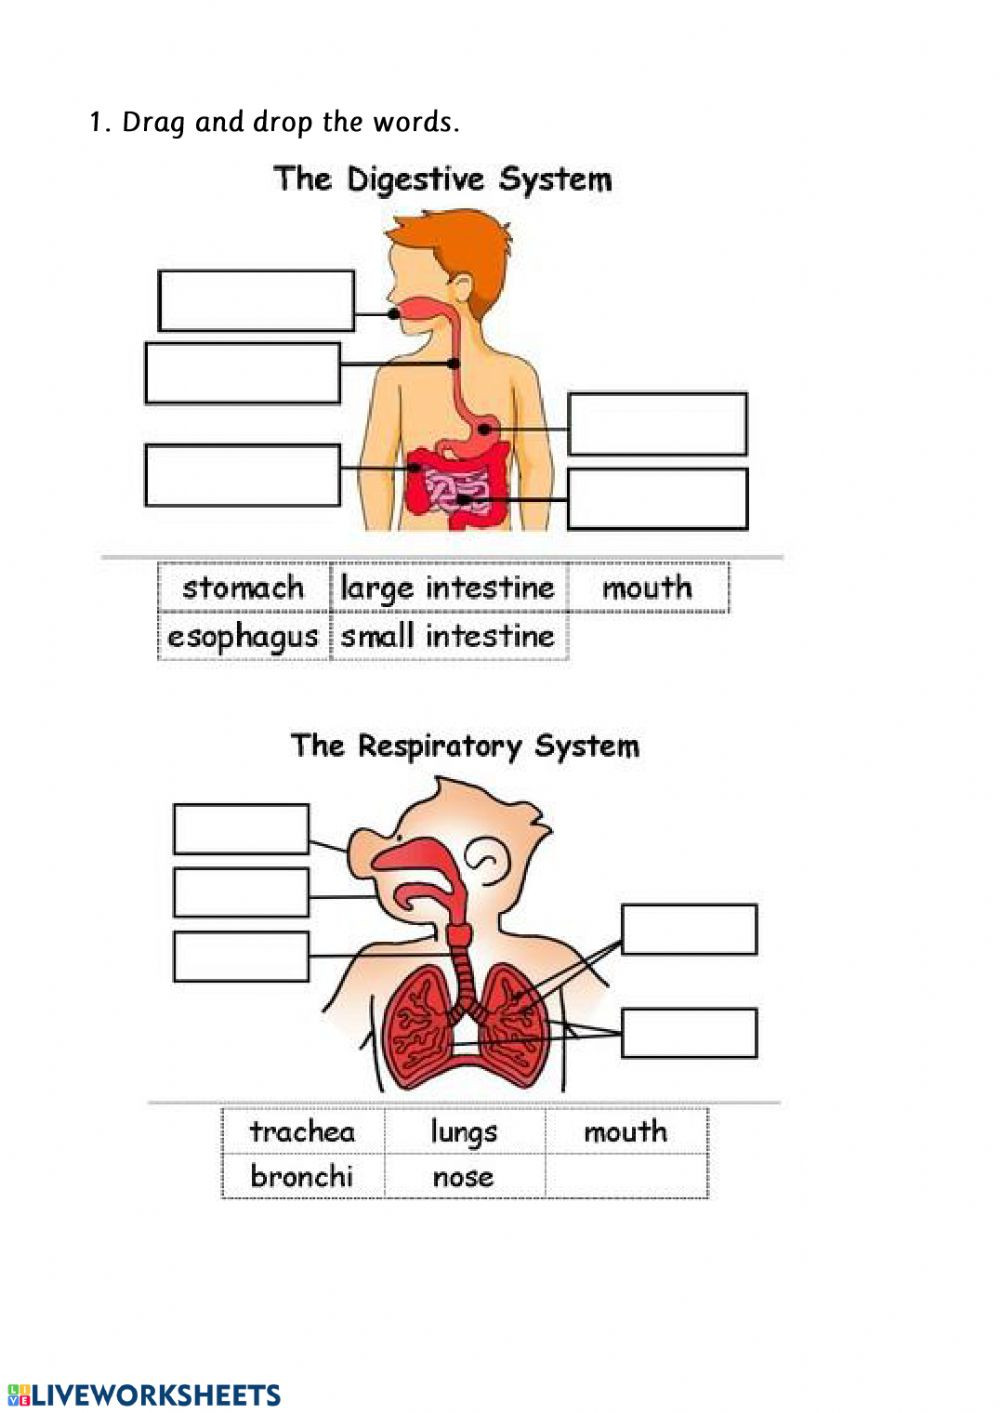 Respiratory System Worksheet Pdf Digestive and Respiratory System Interactive Worksheet